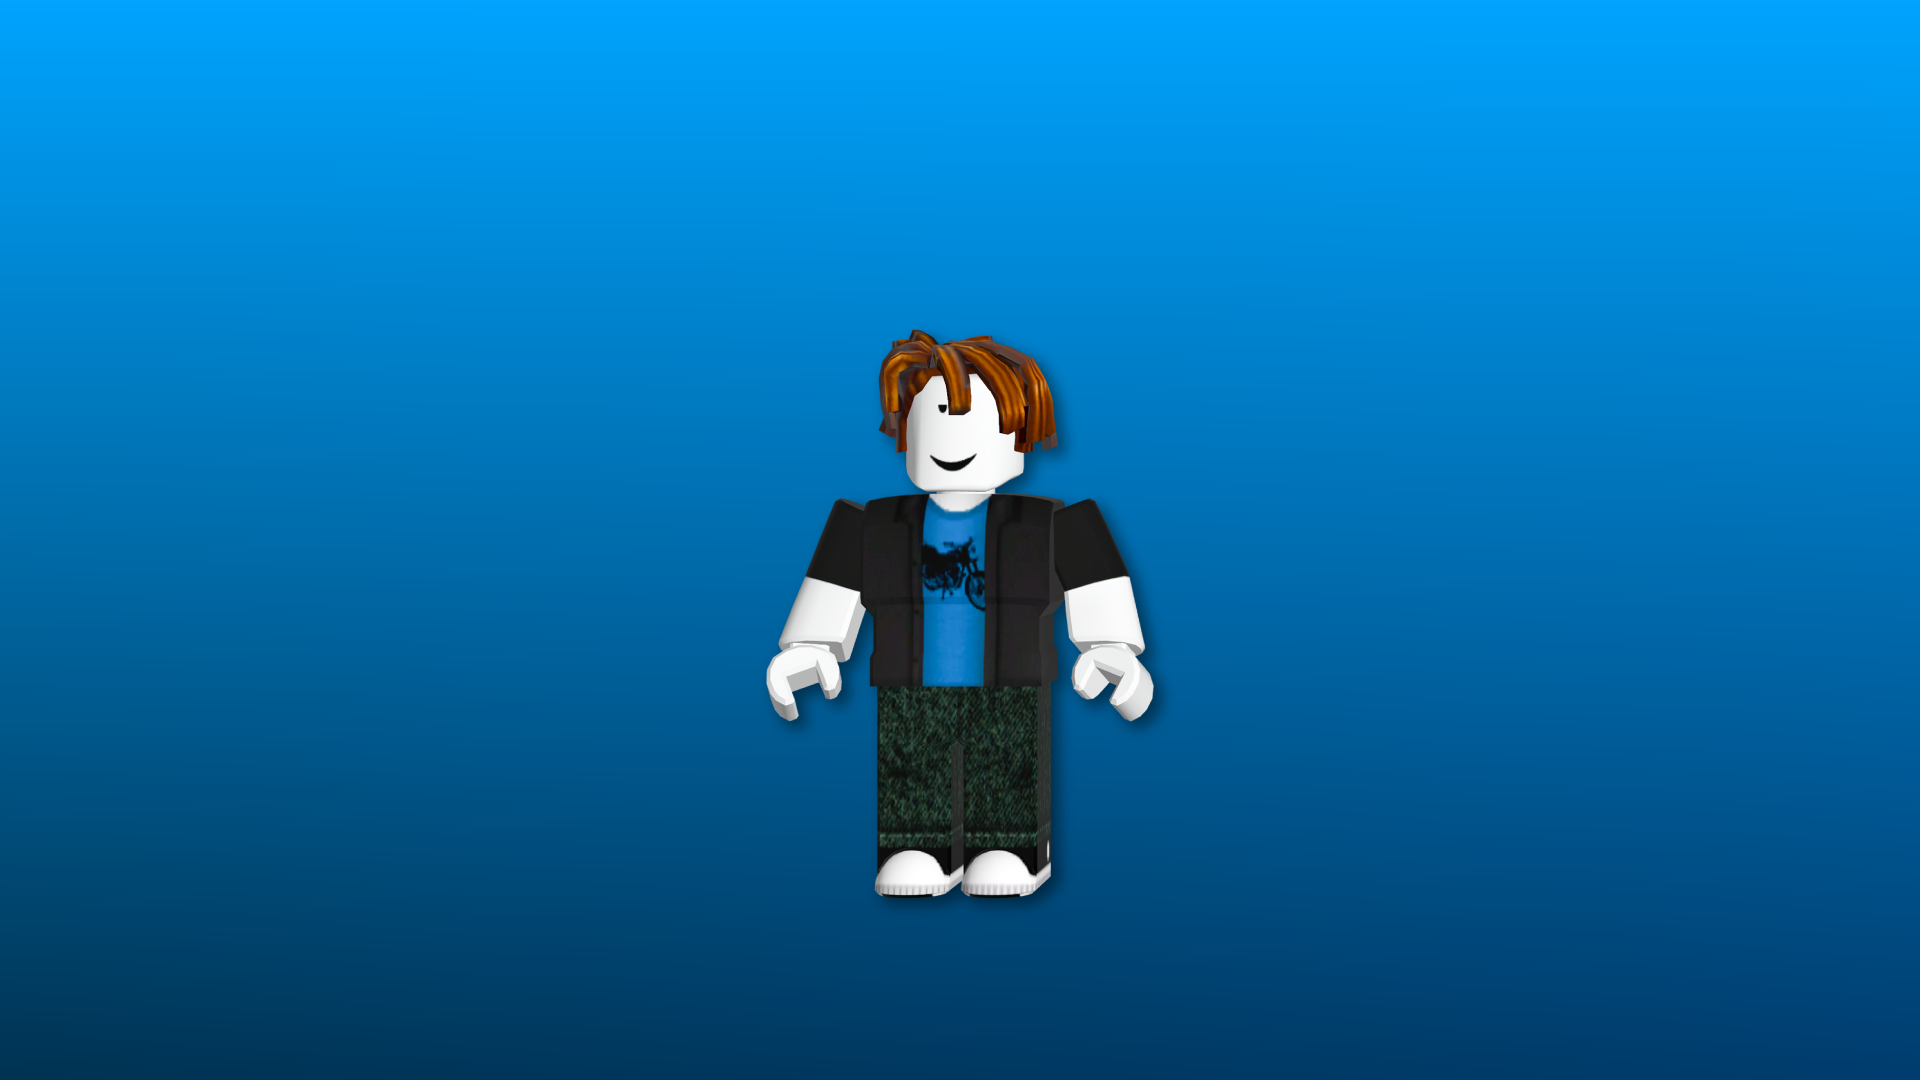 Roblox Character Aesthetic Wallpapers Wallpaper Cave - roblox screensaver character